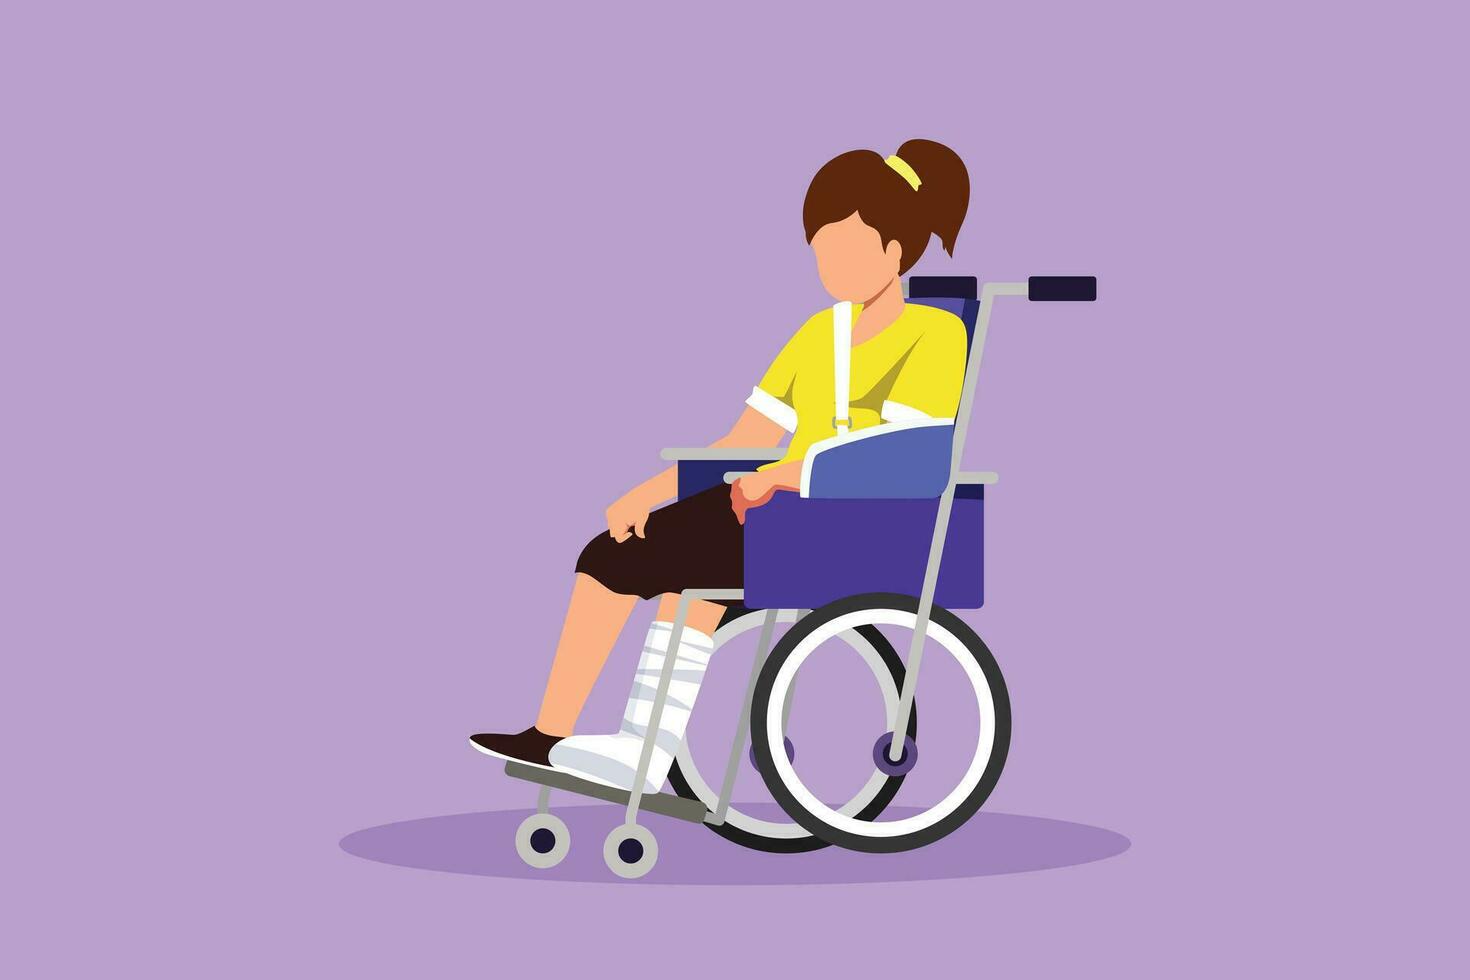 Character flat drawing of little sad girl with leg in plaster. Injured upset kid sitting in wheelchair with broken leg. Child with fractured leg suffering from pain. Cartoon design vector illustration